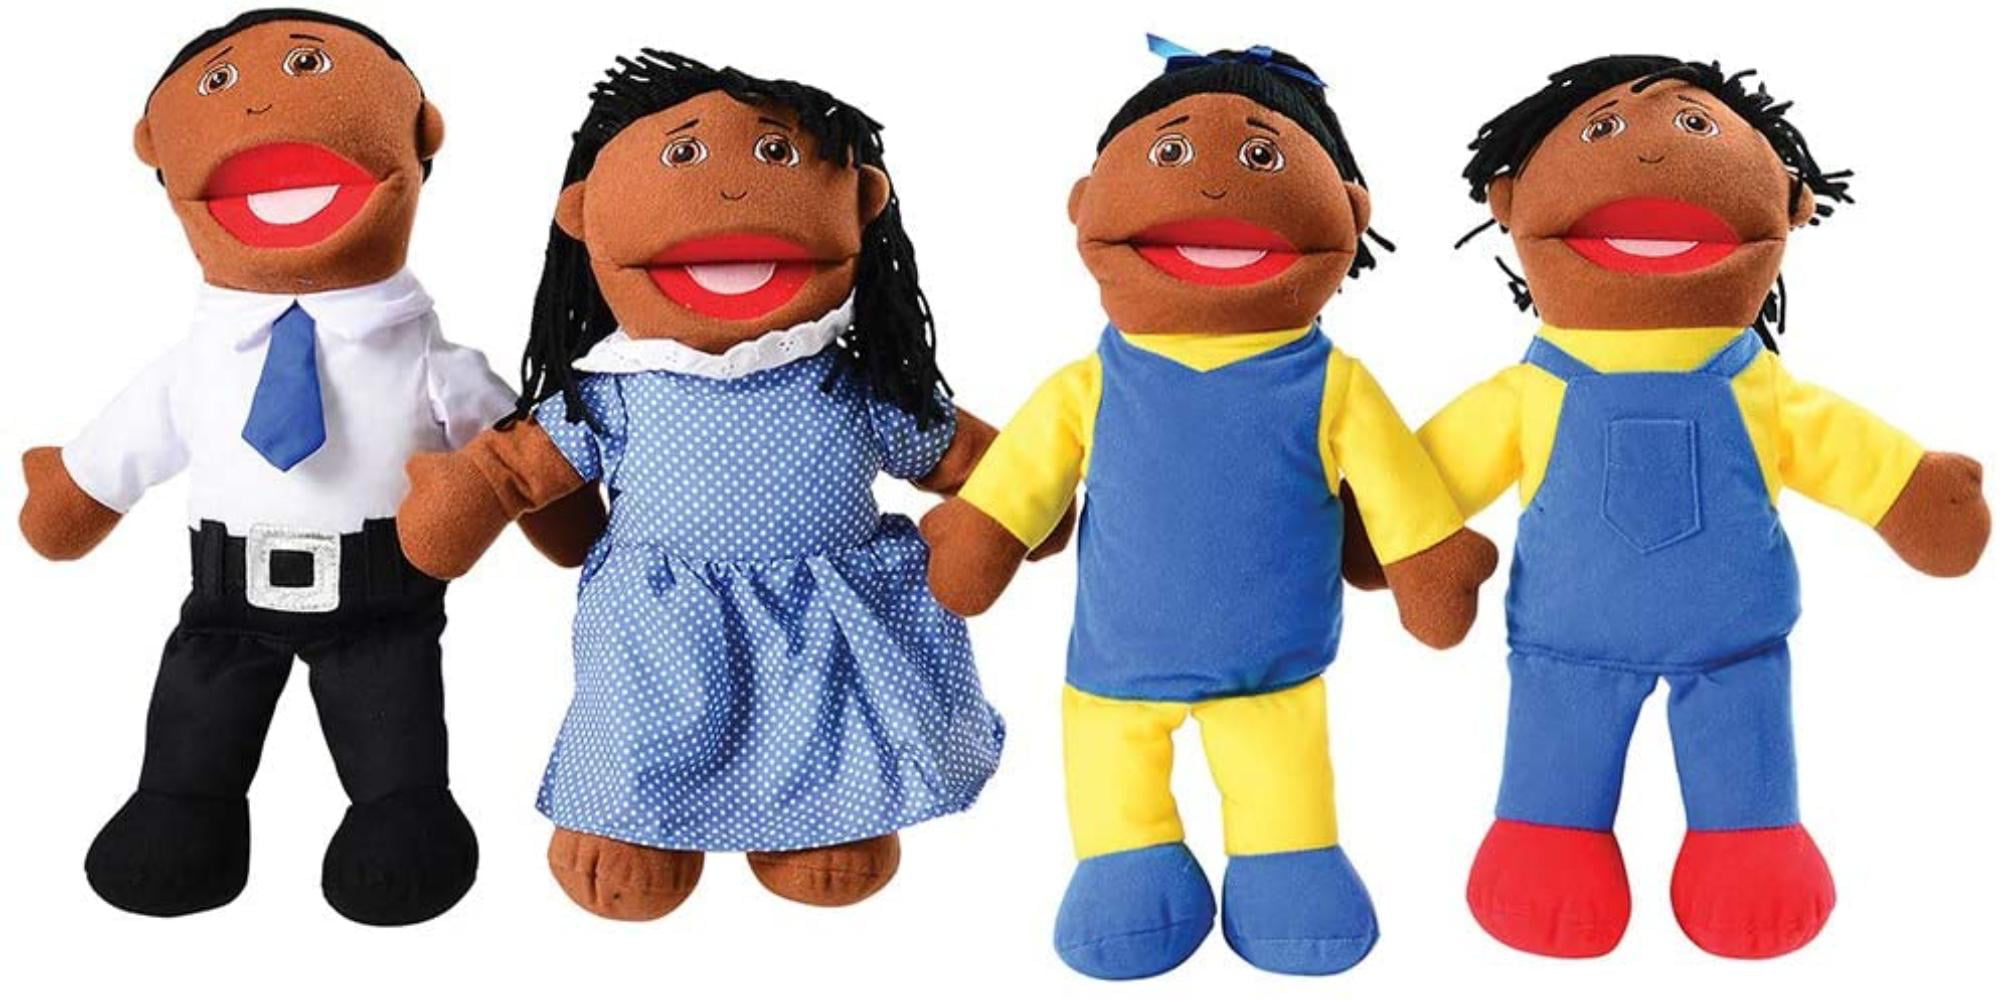 African-American Creative Minds Family Play Set 